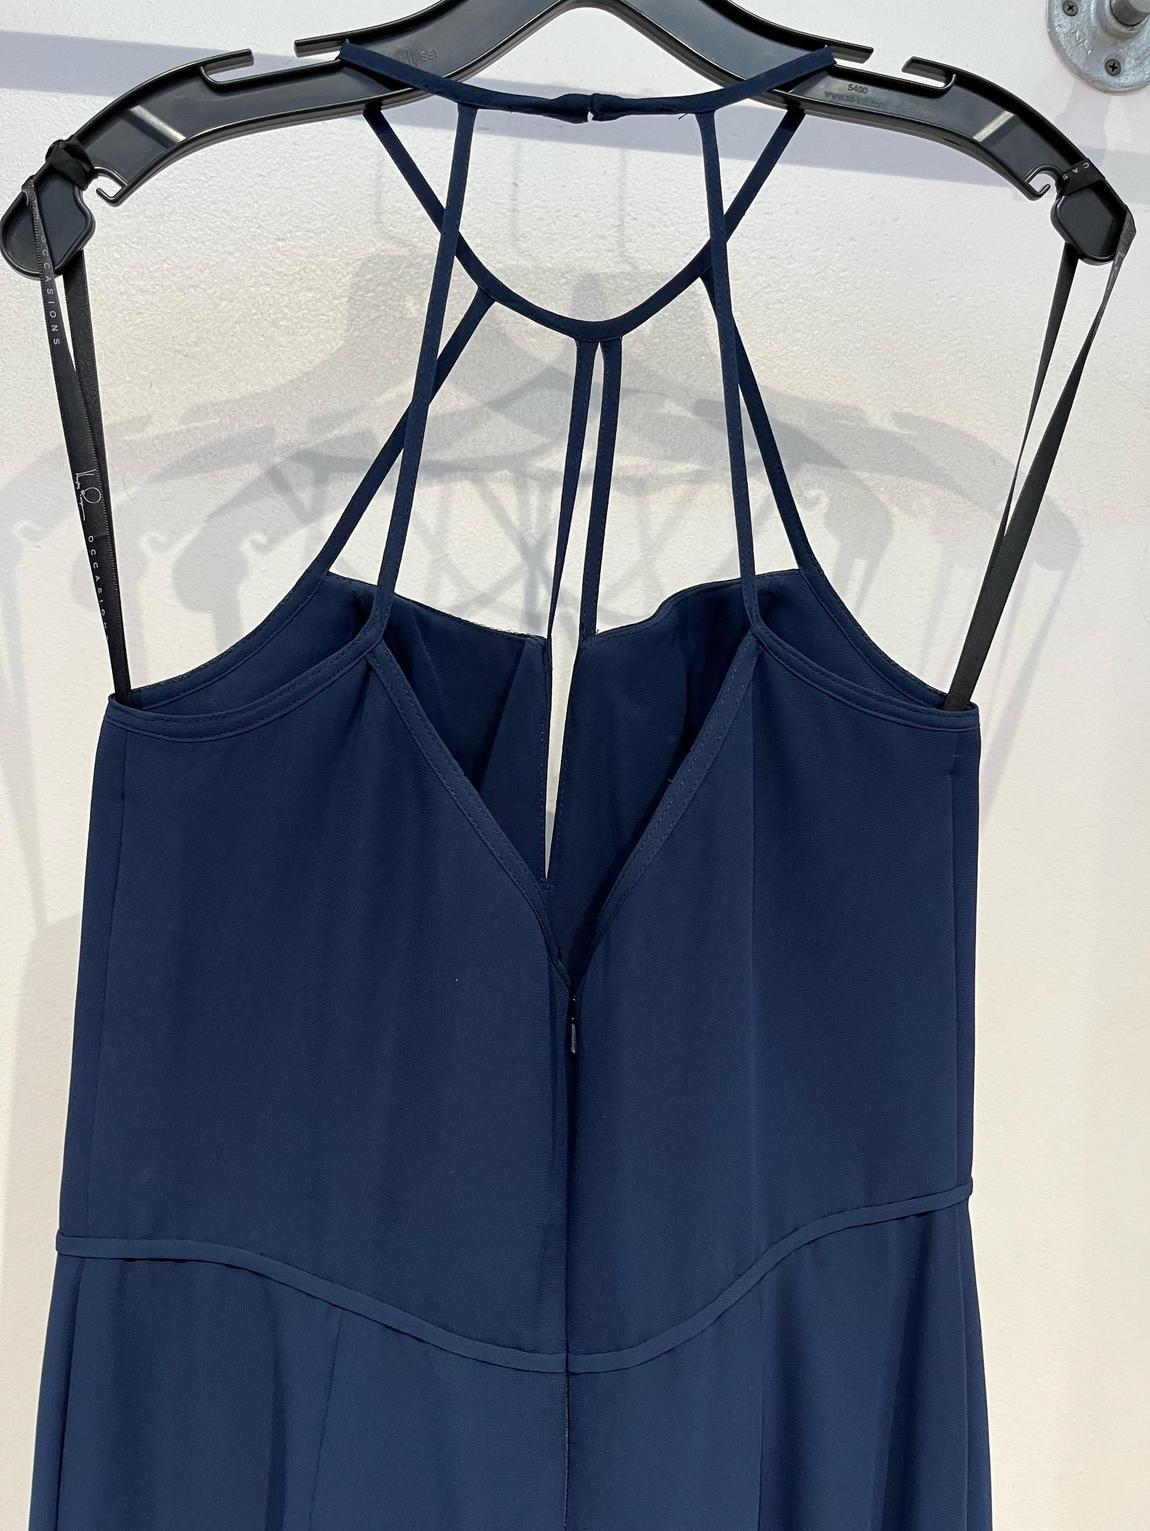 Hayley Paige Size 10 Bridesmaid High Neck Navy Blue A-line Dress on Queenly